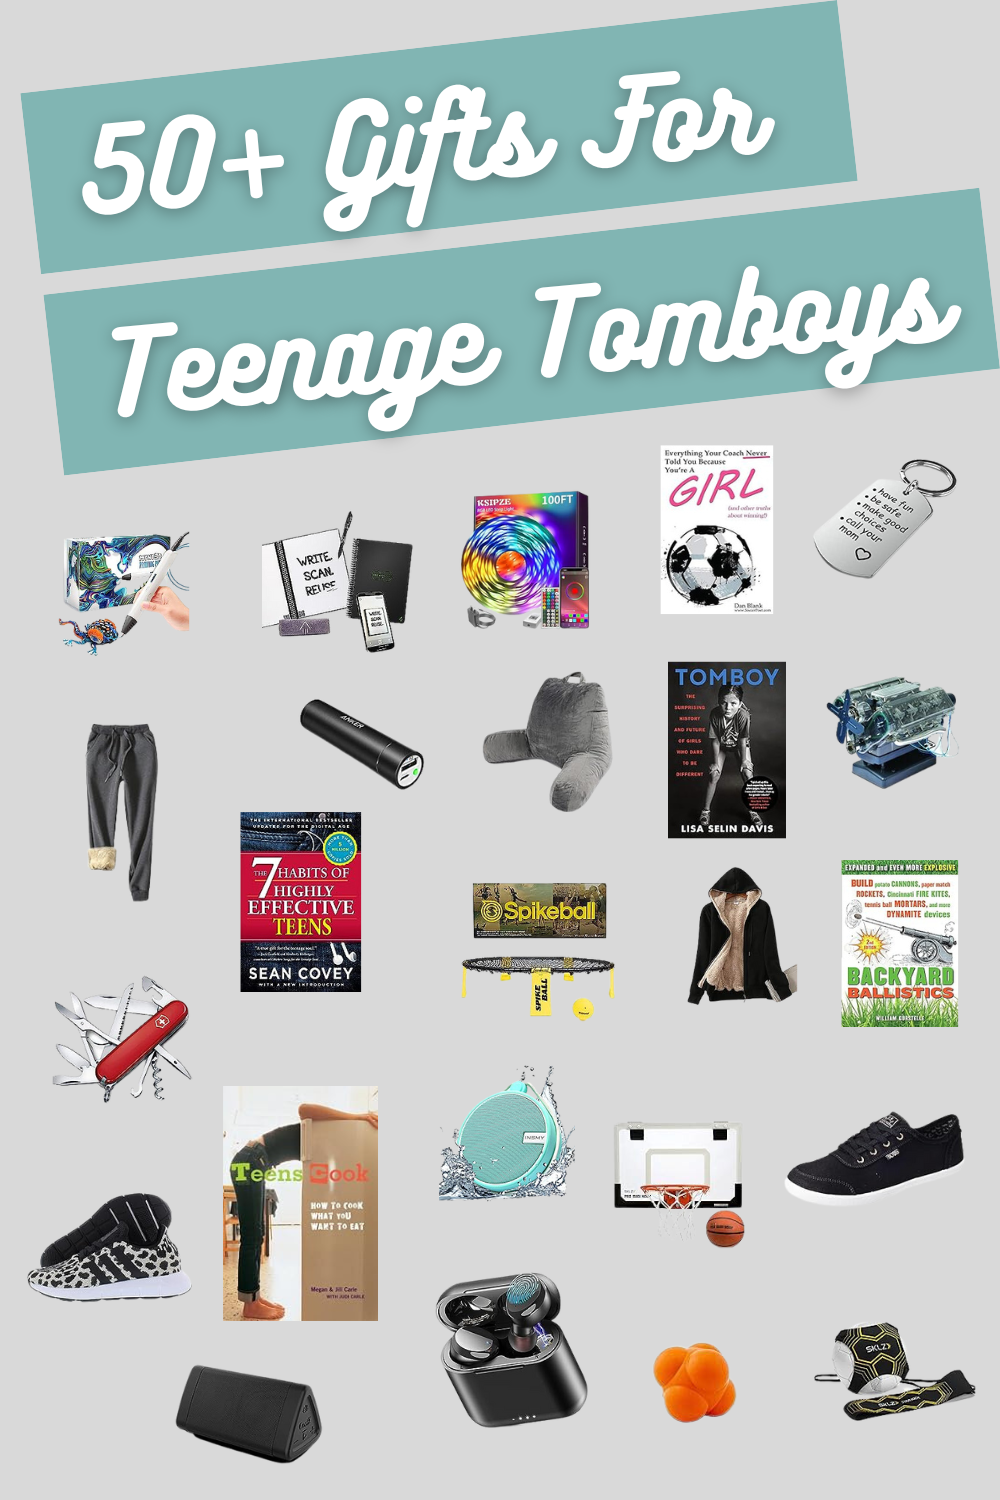 Gadgets, toys and clothing gifts for teenage tombosy